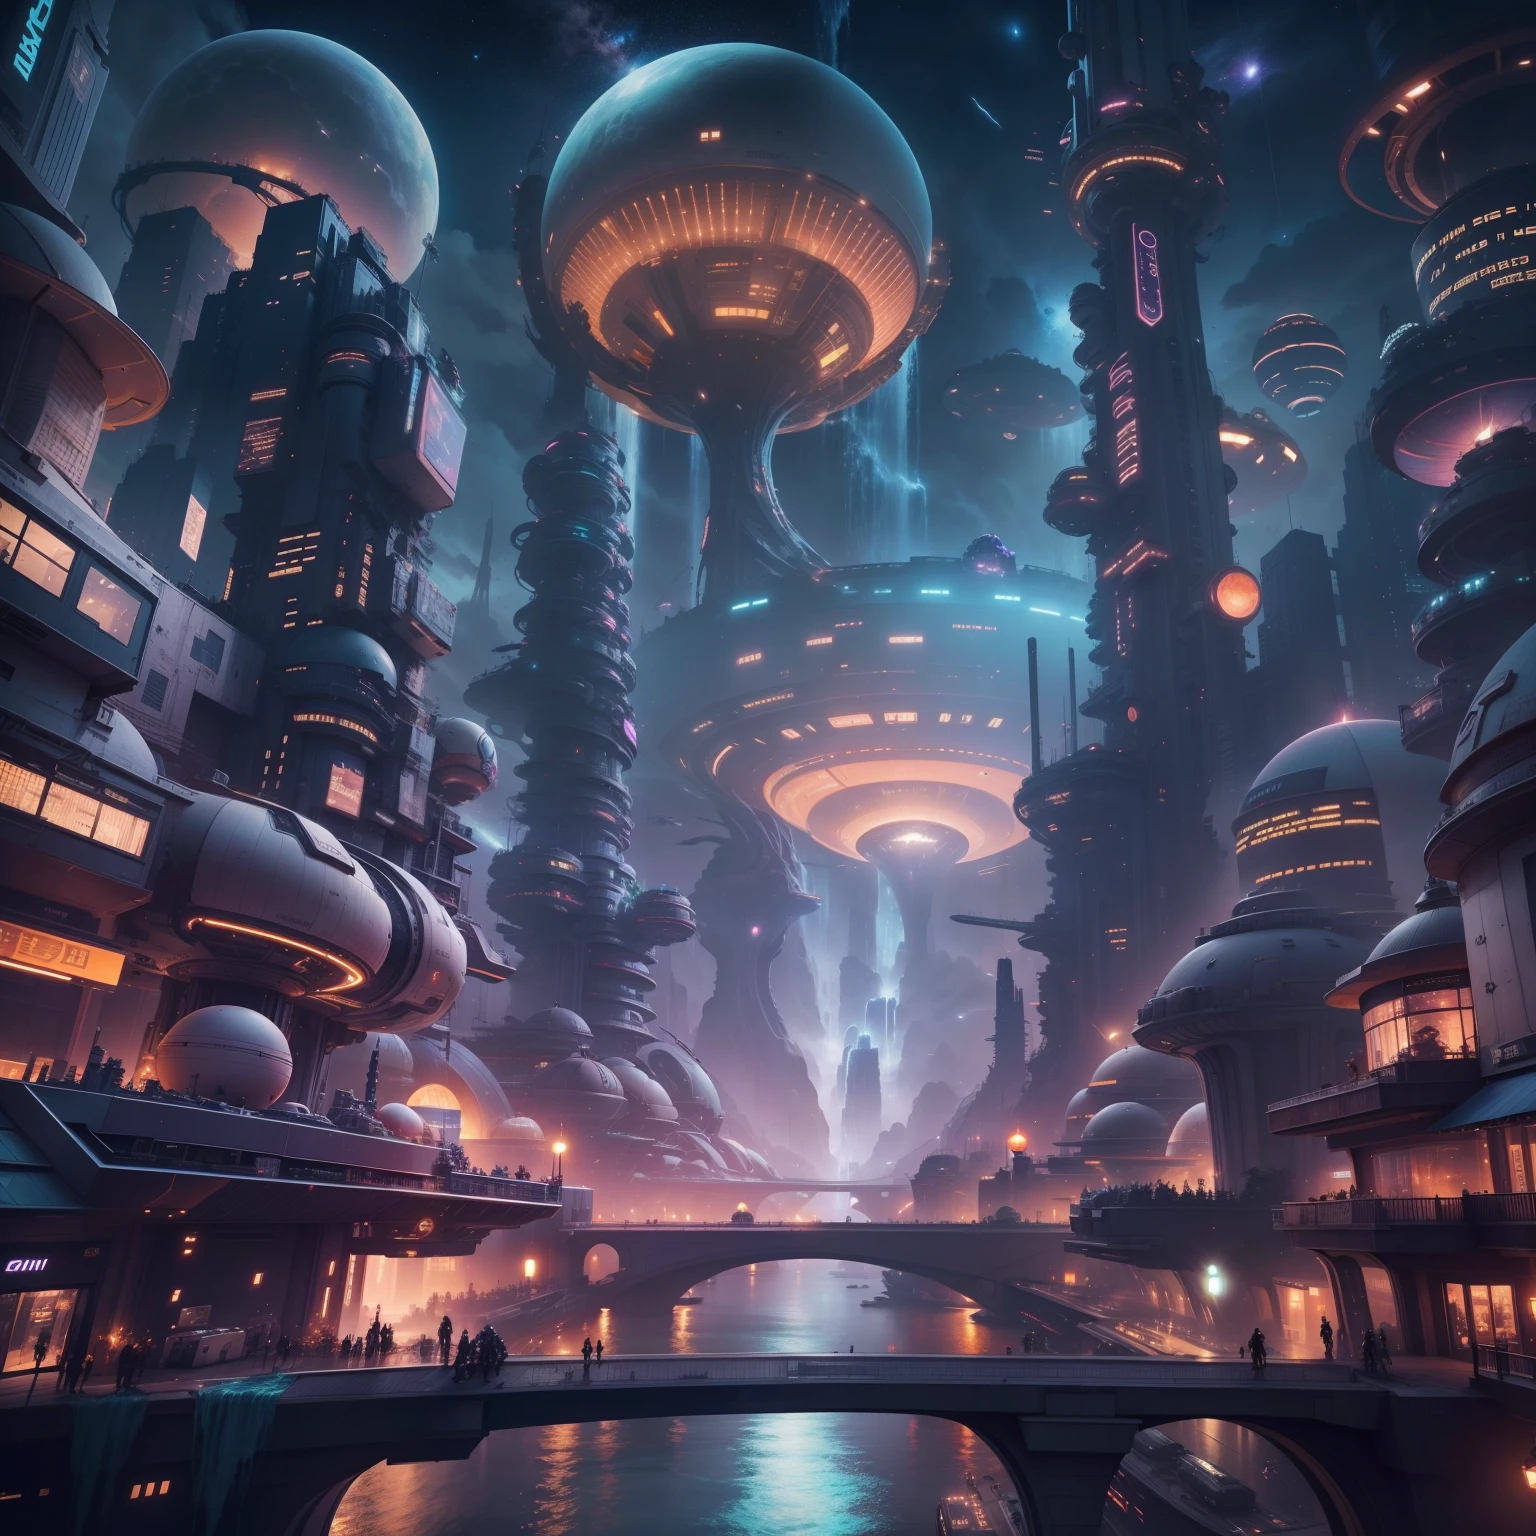 Space City、Futuristic cities、alien、floating in the universe、cyberpunked、The streets are lined with skyscrapers、nighttime scene、A space station、Super giant waterfall、top-quality、​masterpiece、２４century、dream、utopian、planet earth、World of Dreams、Fantasia、𝓡𝓸𝓶𝓪𝓷𝓽𝓲𝓬、Beautiful city